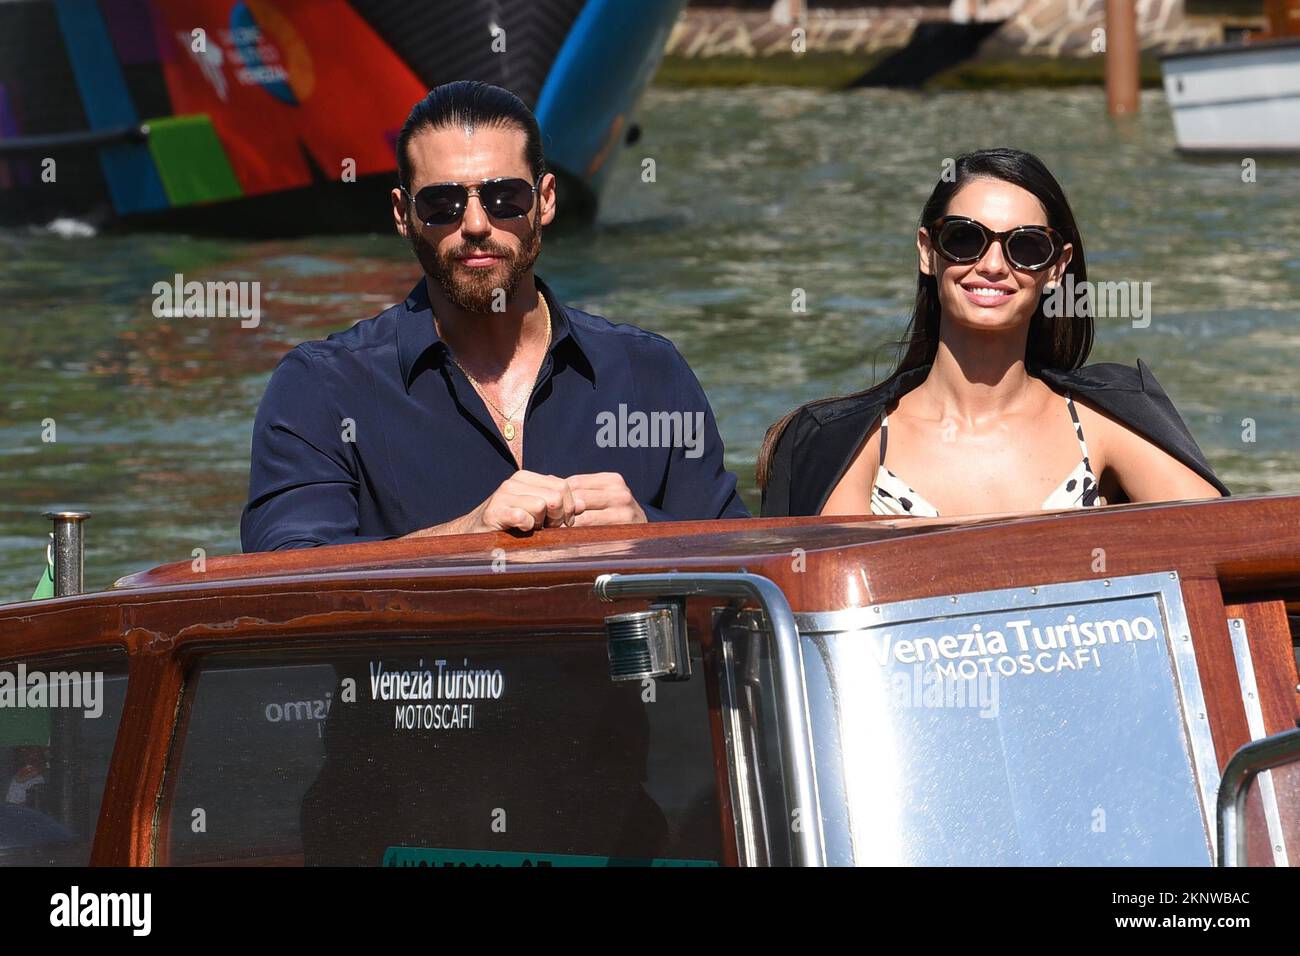 Venice 79, day 5 arrive at Darsena with Can Yaman In photo: Can Yaman, Francesca Chillemi  Where: Venezia When: 04 Sep 2022 Credit: Francesca Vieceli Stock Photo